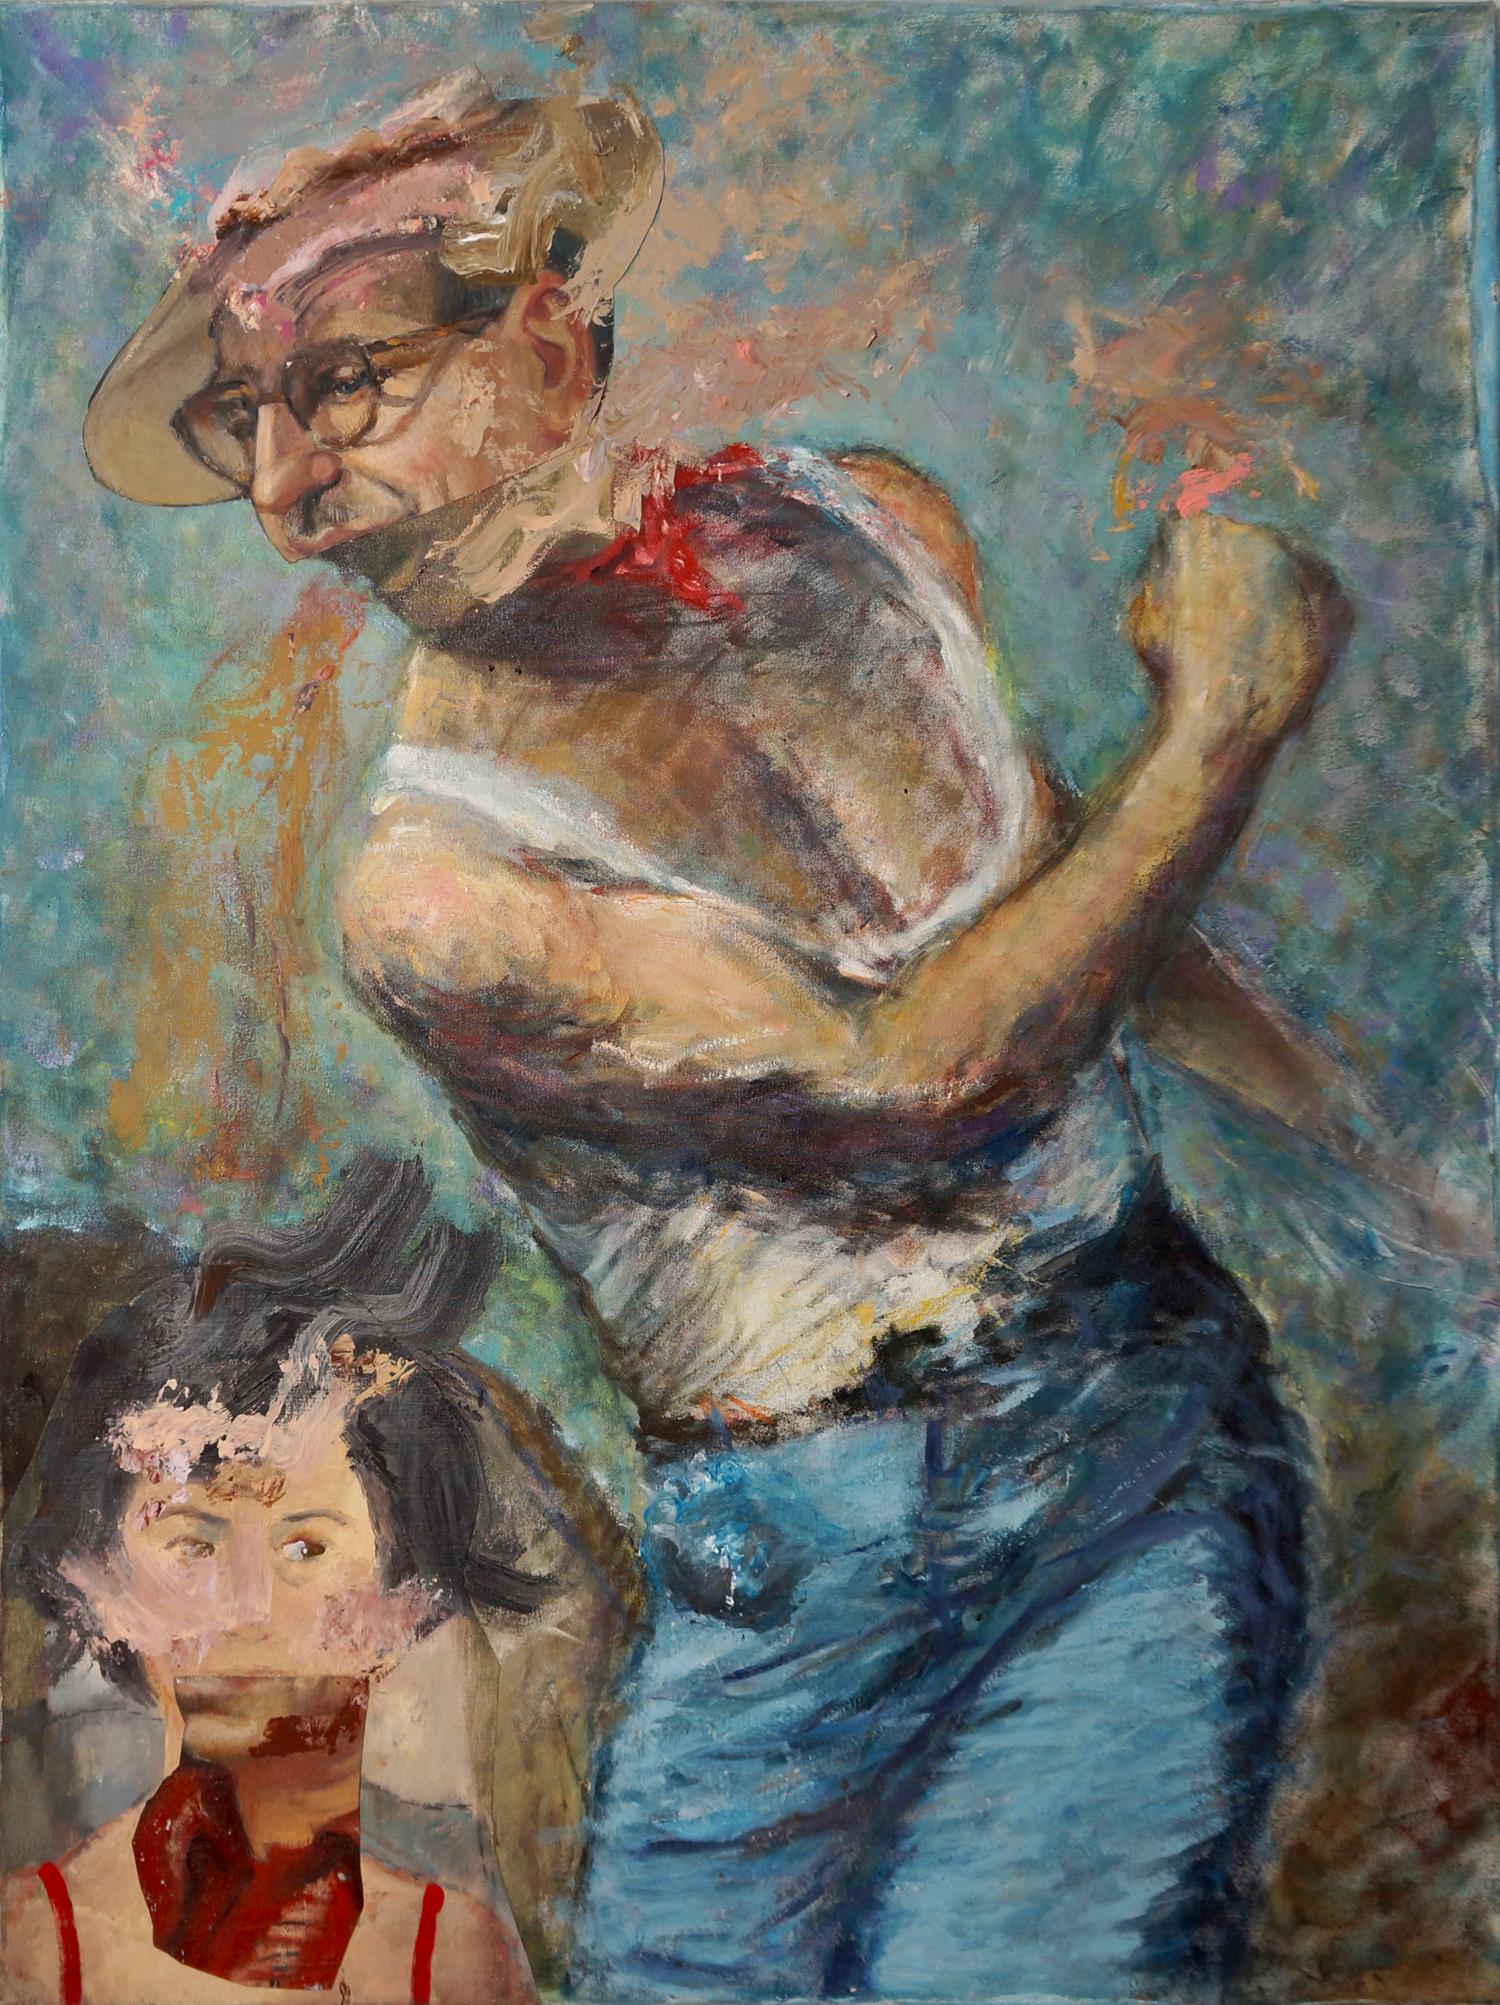 John Baker Portrait Painting - "Domestic Dispute", contemporary, collage, woman, man, blue, red, mixed media